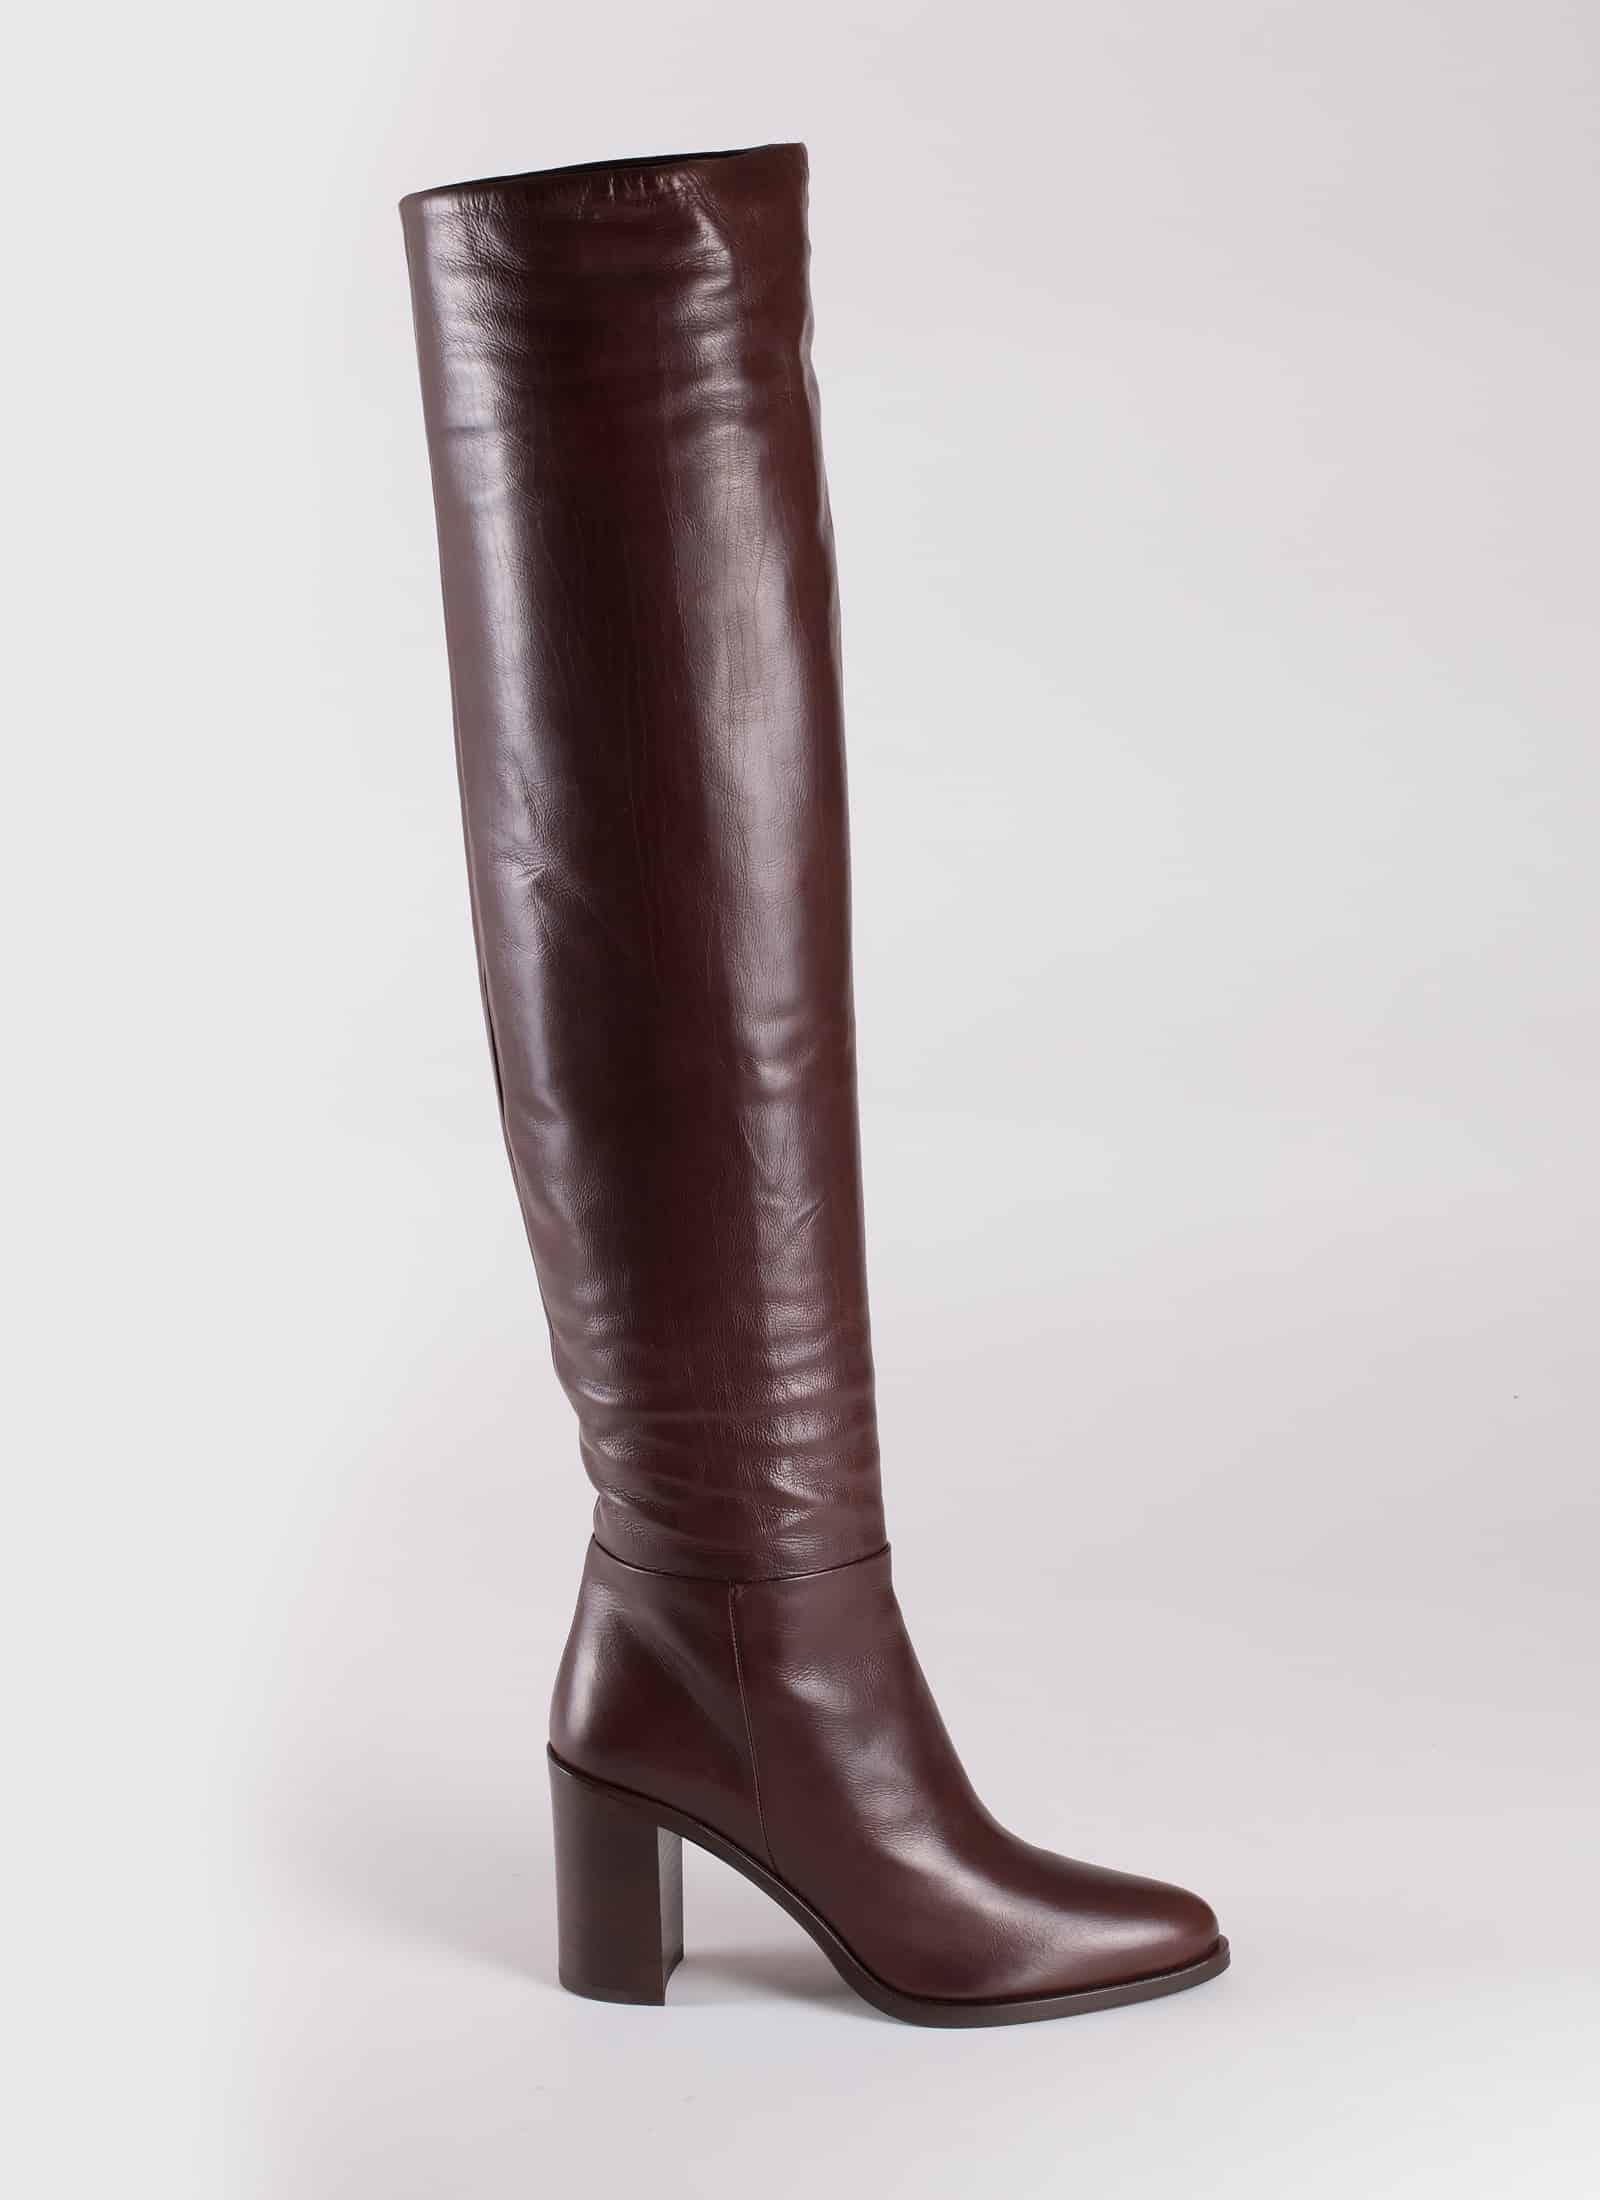 LEATHER ANKLE BOOTS - PRADA